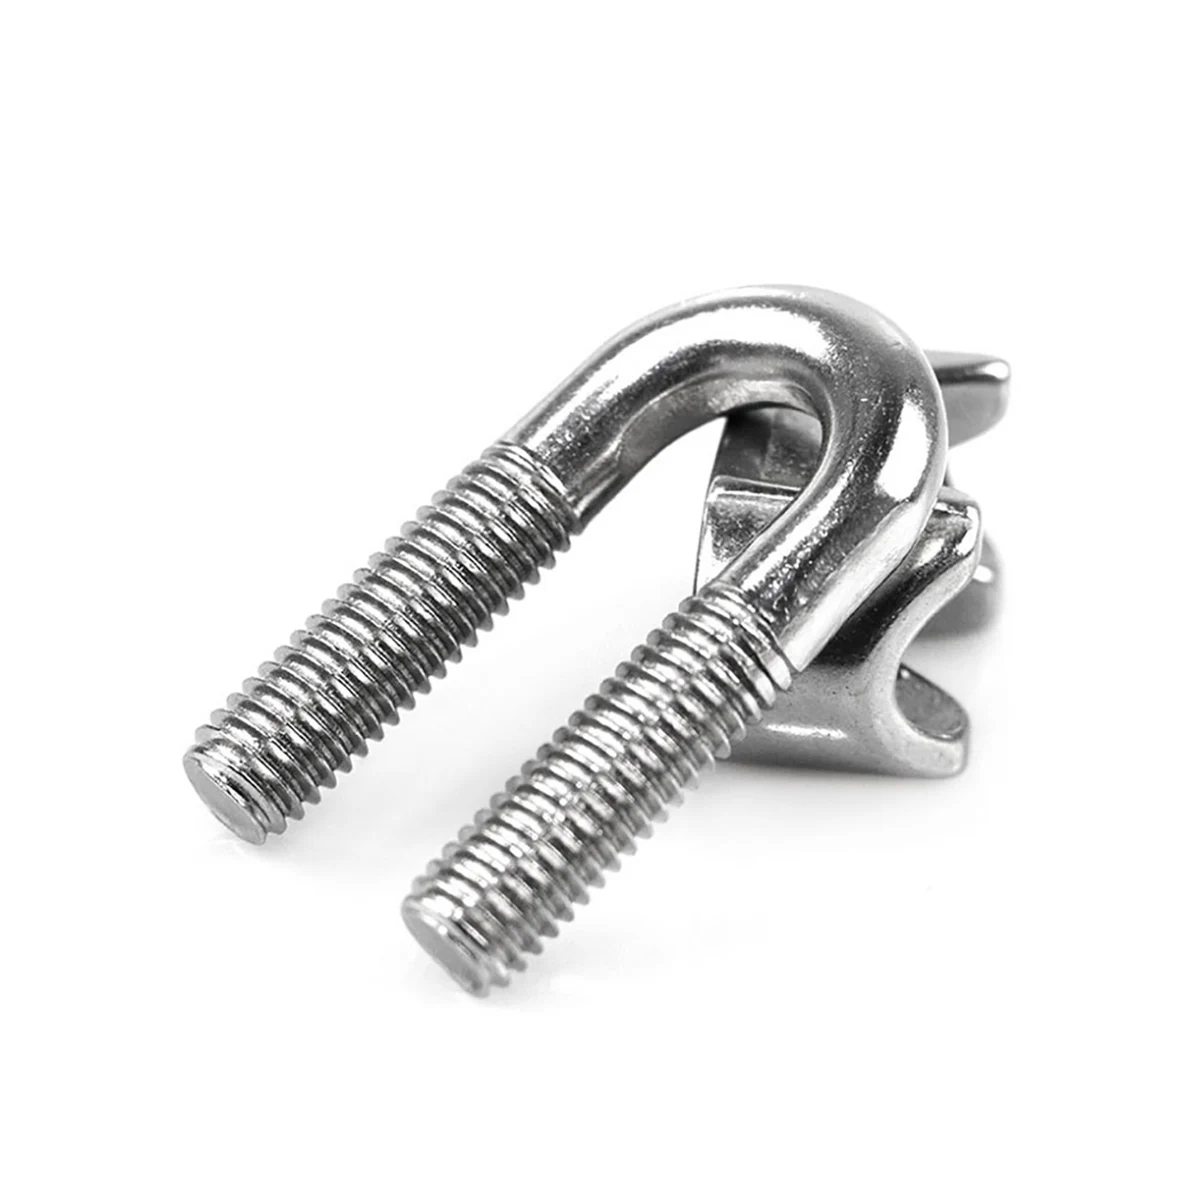 316 Stainless Steel U Type Clamp Wire Rope Clips M2 M3 M4 M5 M6 M8 M10 - M16 Wire Rope Clip Cable Bolts Rigging Hardware Clamps